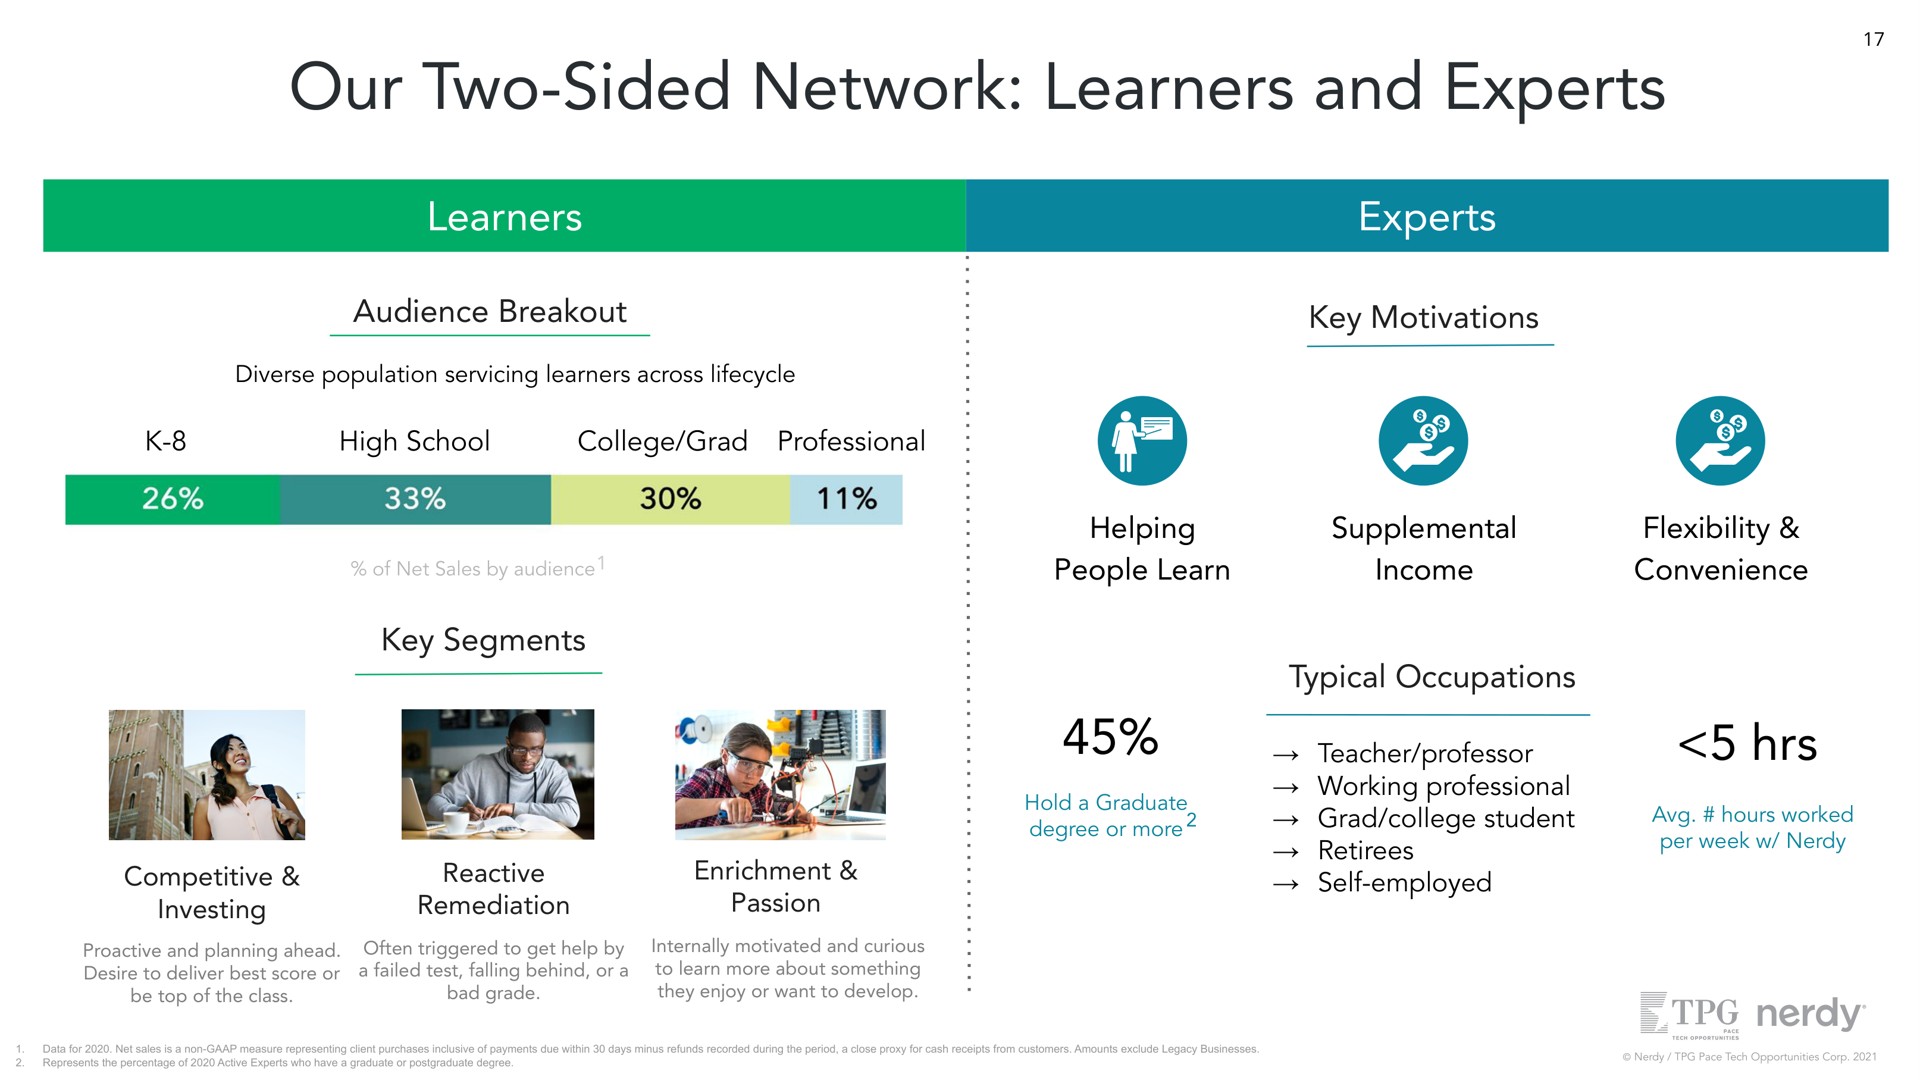 our two sided network learners and experts learners audience breakout diverse population servicing learners across high school college grad professional experts key motivations key segments competitive investing reactive remediation enrichment passion helping people learn supplemental income flexibility convenience hold a graduate degree or more typical occupations teacher professor working professional grad college student retirees self employed hours worked per week | Nerdy